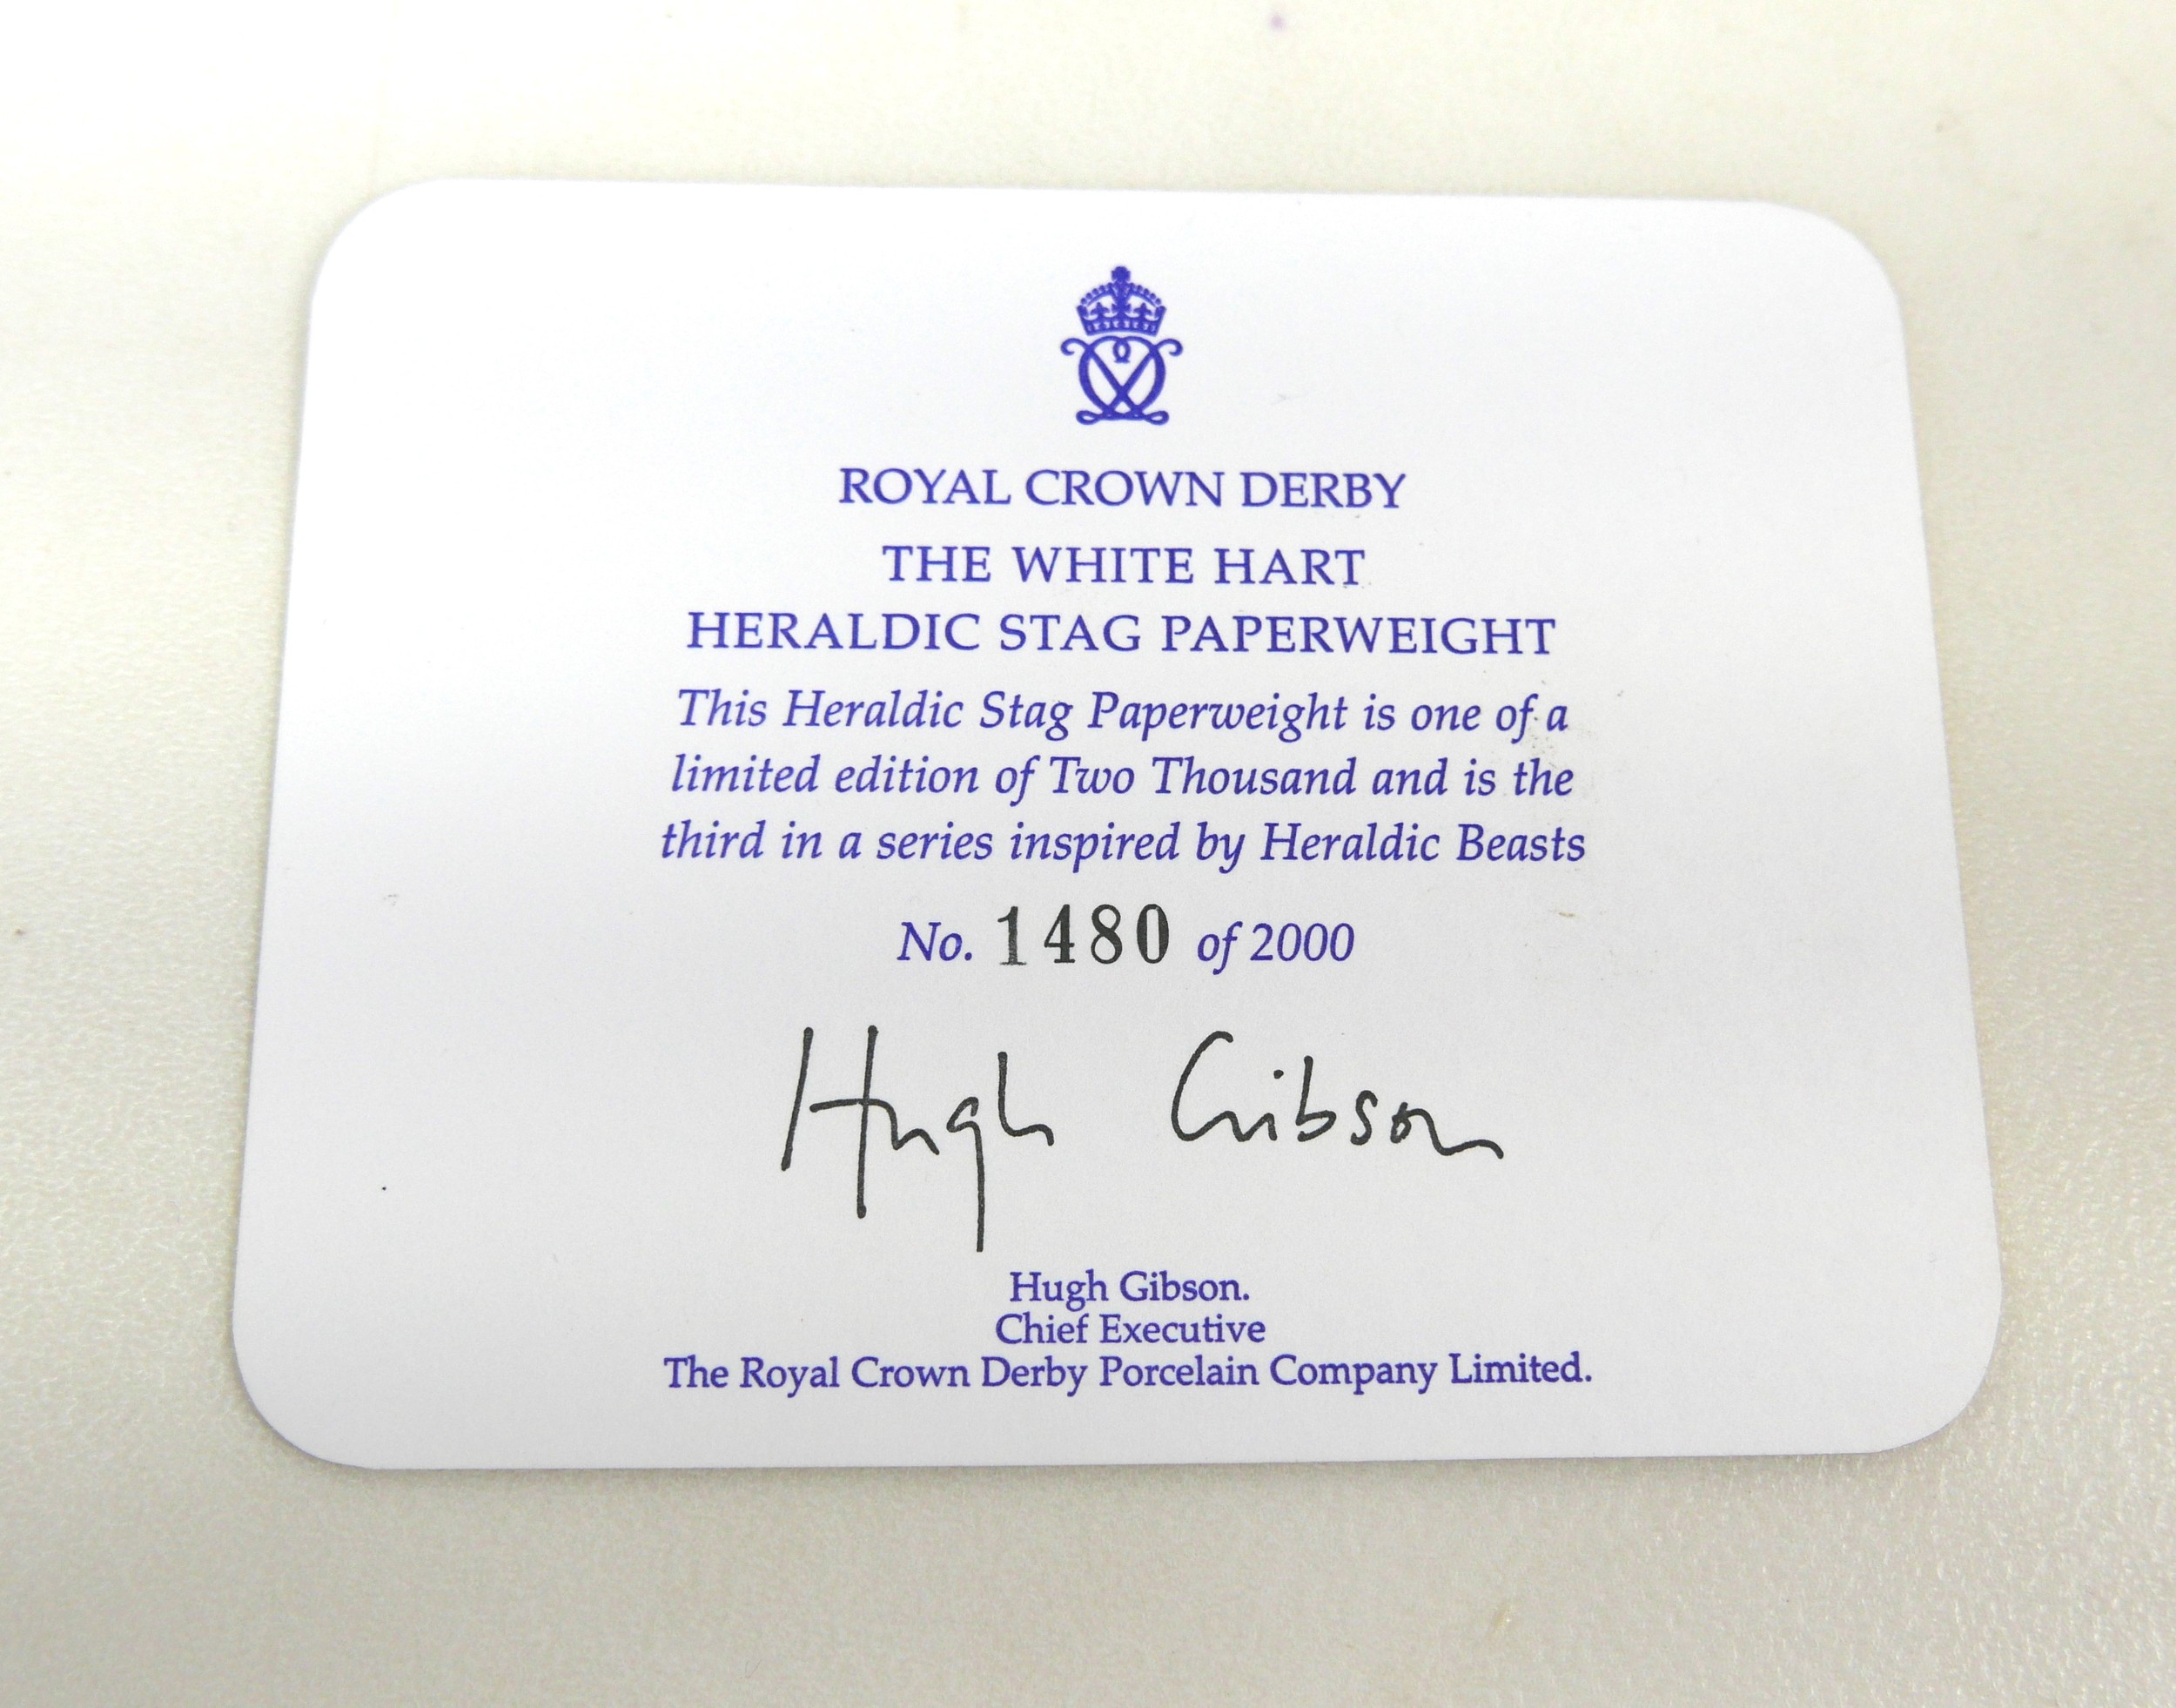 A Royal Crown Derby paperweight, modelled as a limited edition "White Hart", numbered 1480/2000, - Image 12 of 12